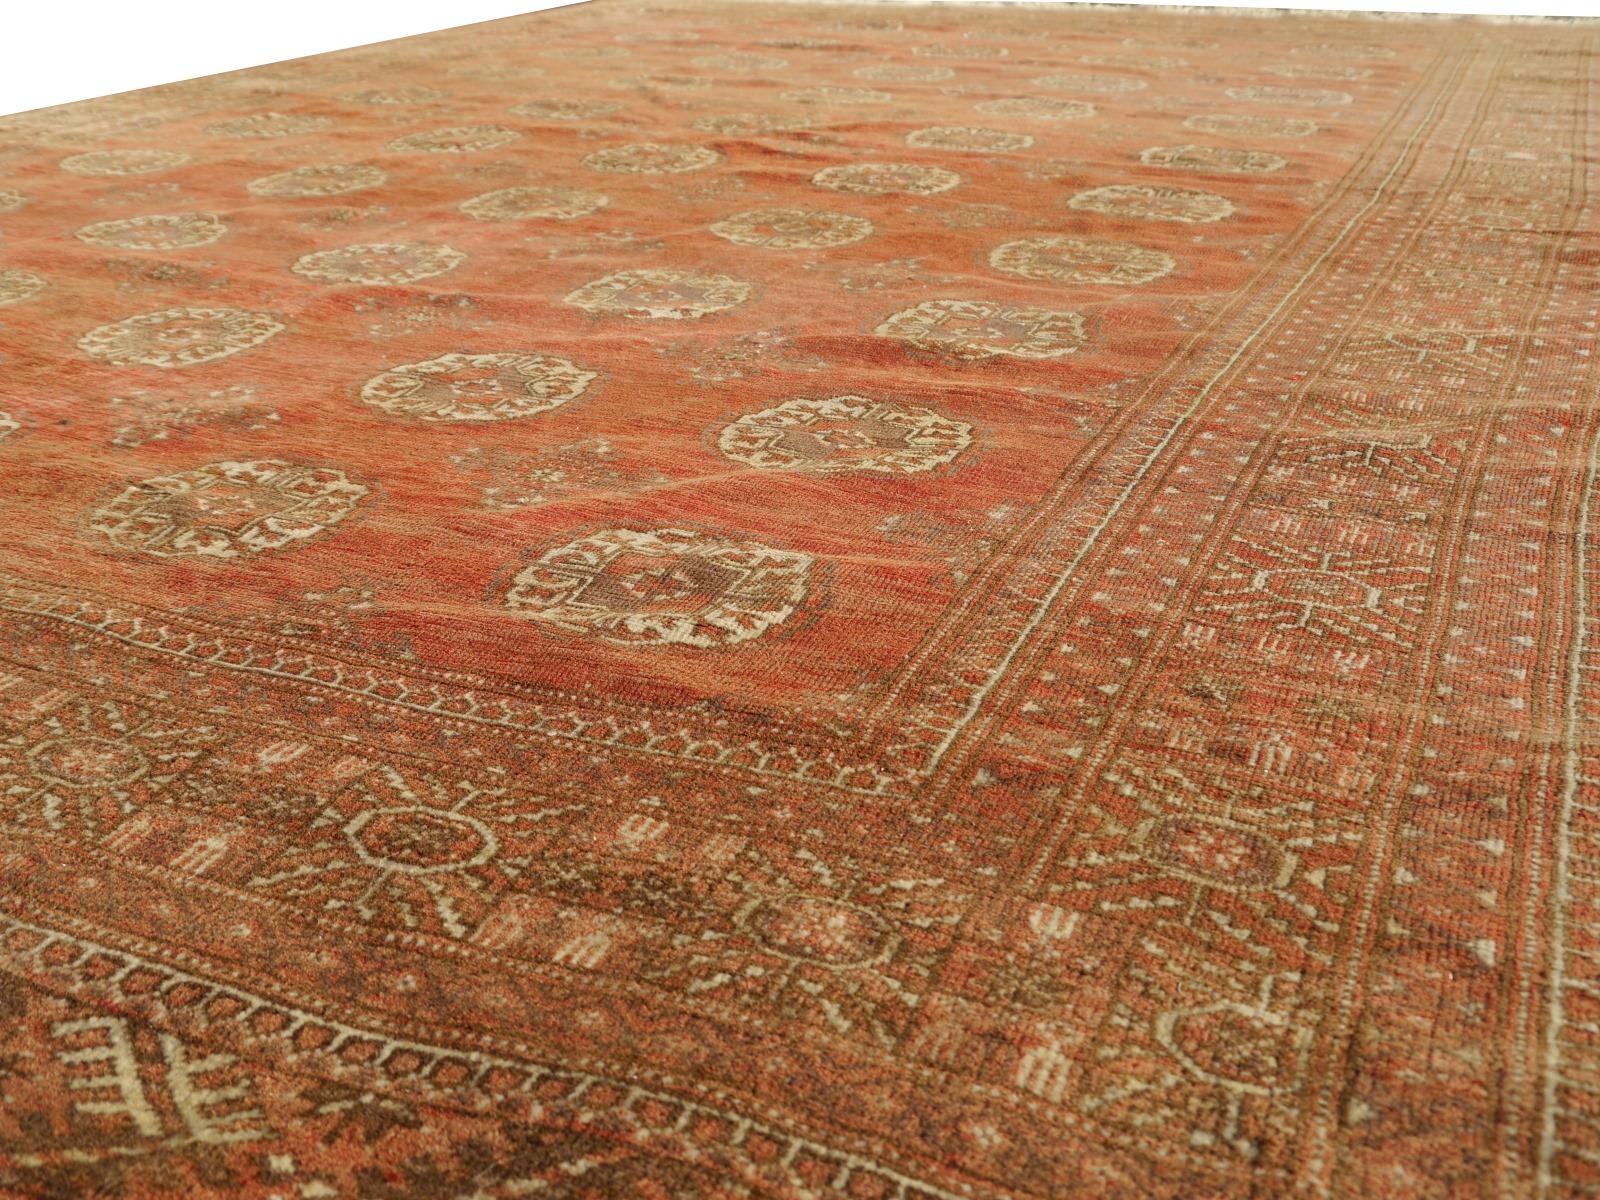 Ersari Rug Tribal Turkoman Hand Knotted Semi Antique Carpet Muted Faded Low Pile In Good Condition For Sale In Lohr, Bavaria, DE